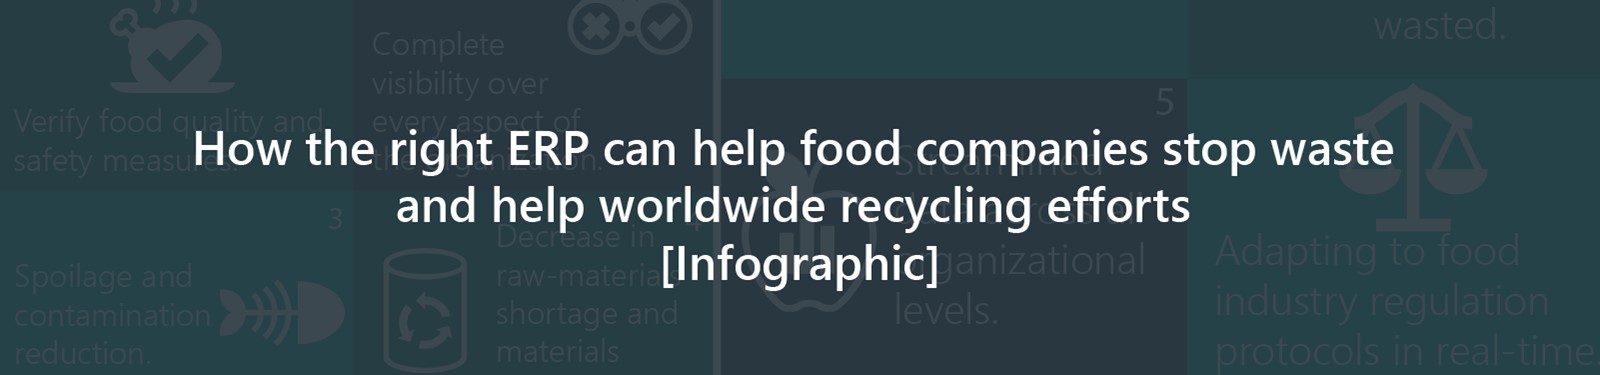 Header website Recycling Infographic-01.png